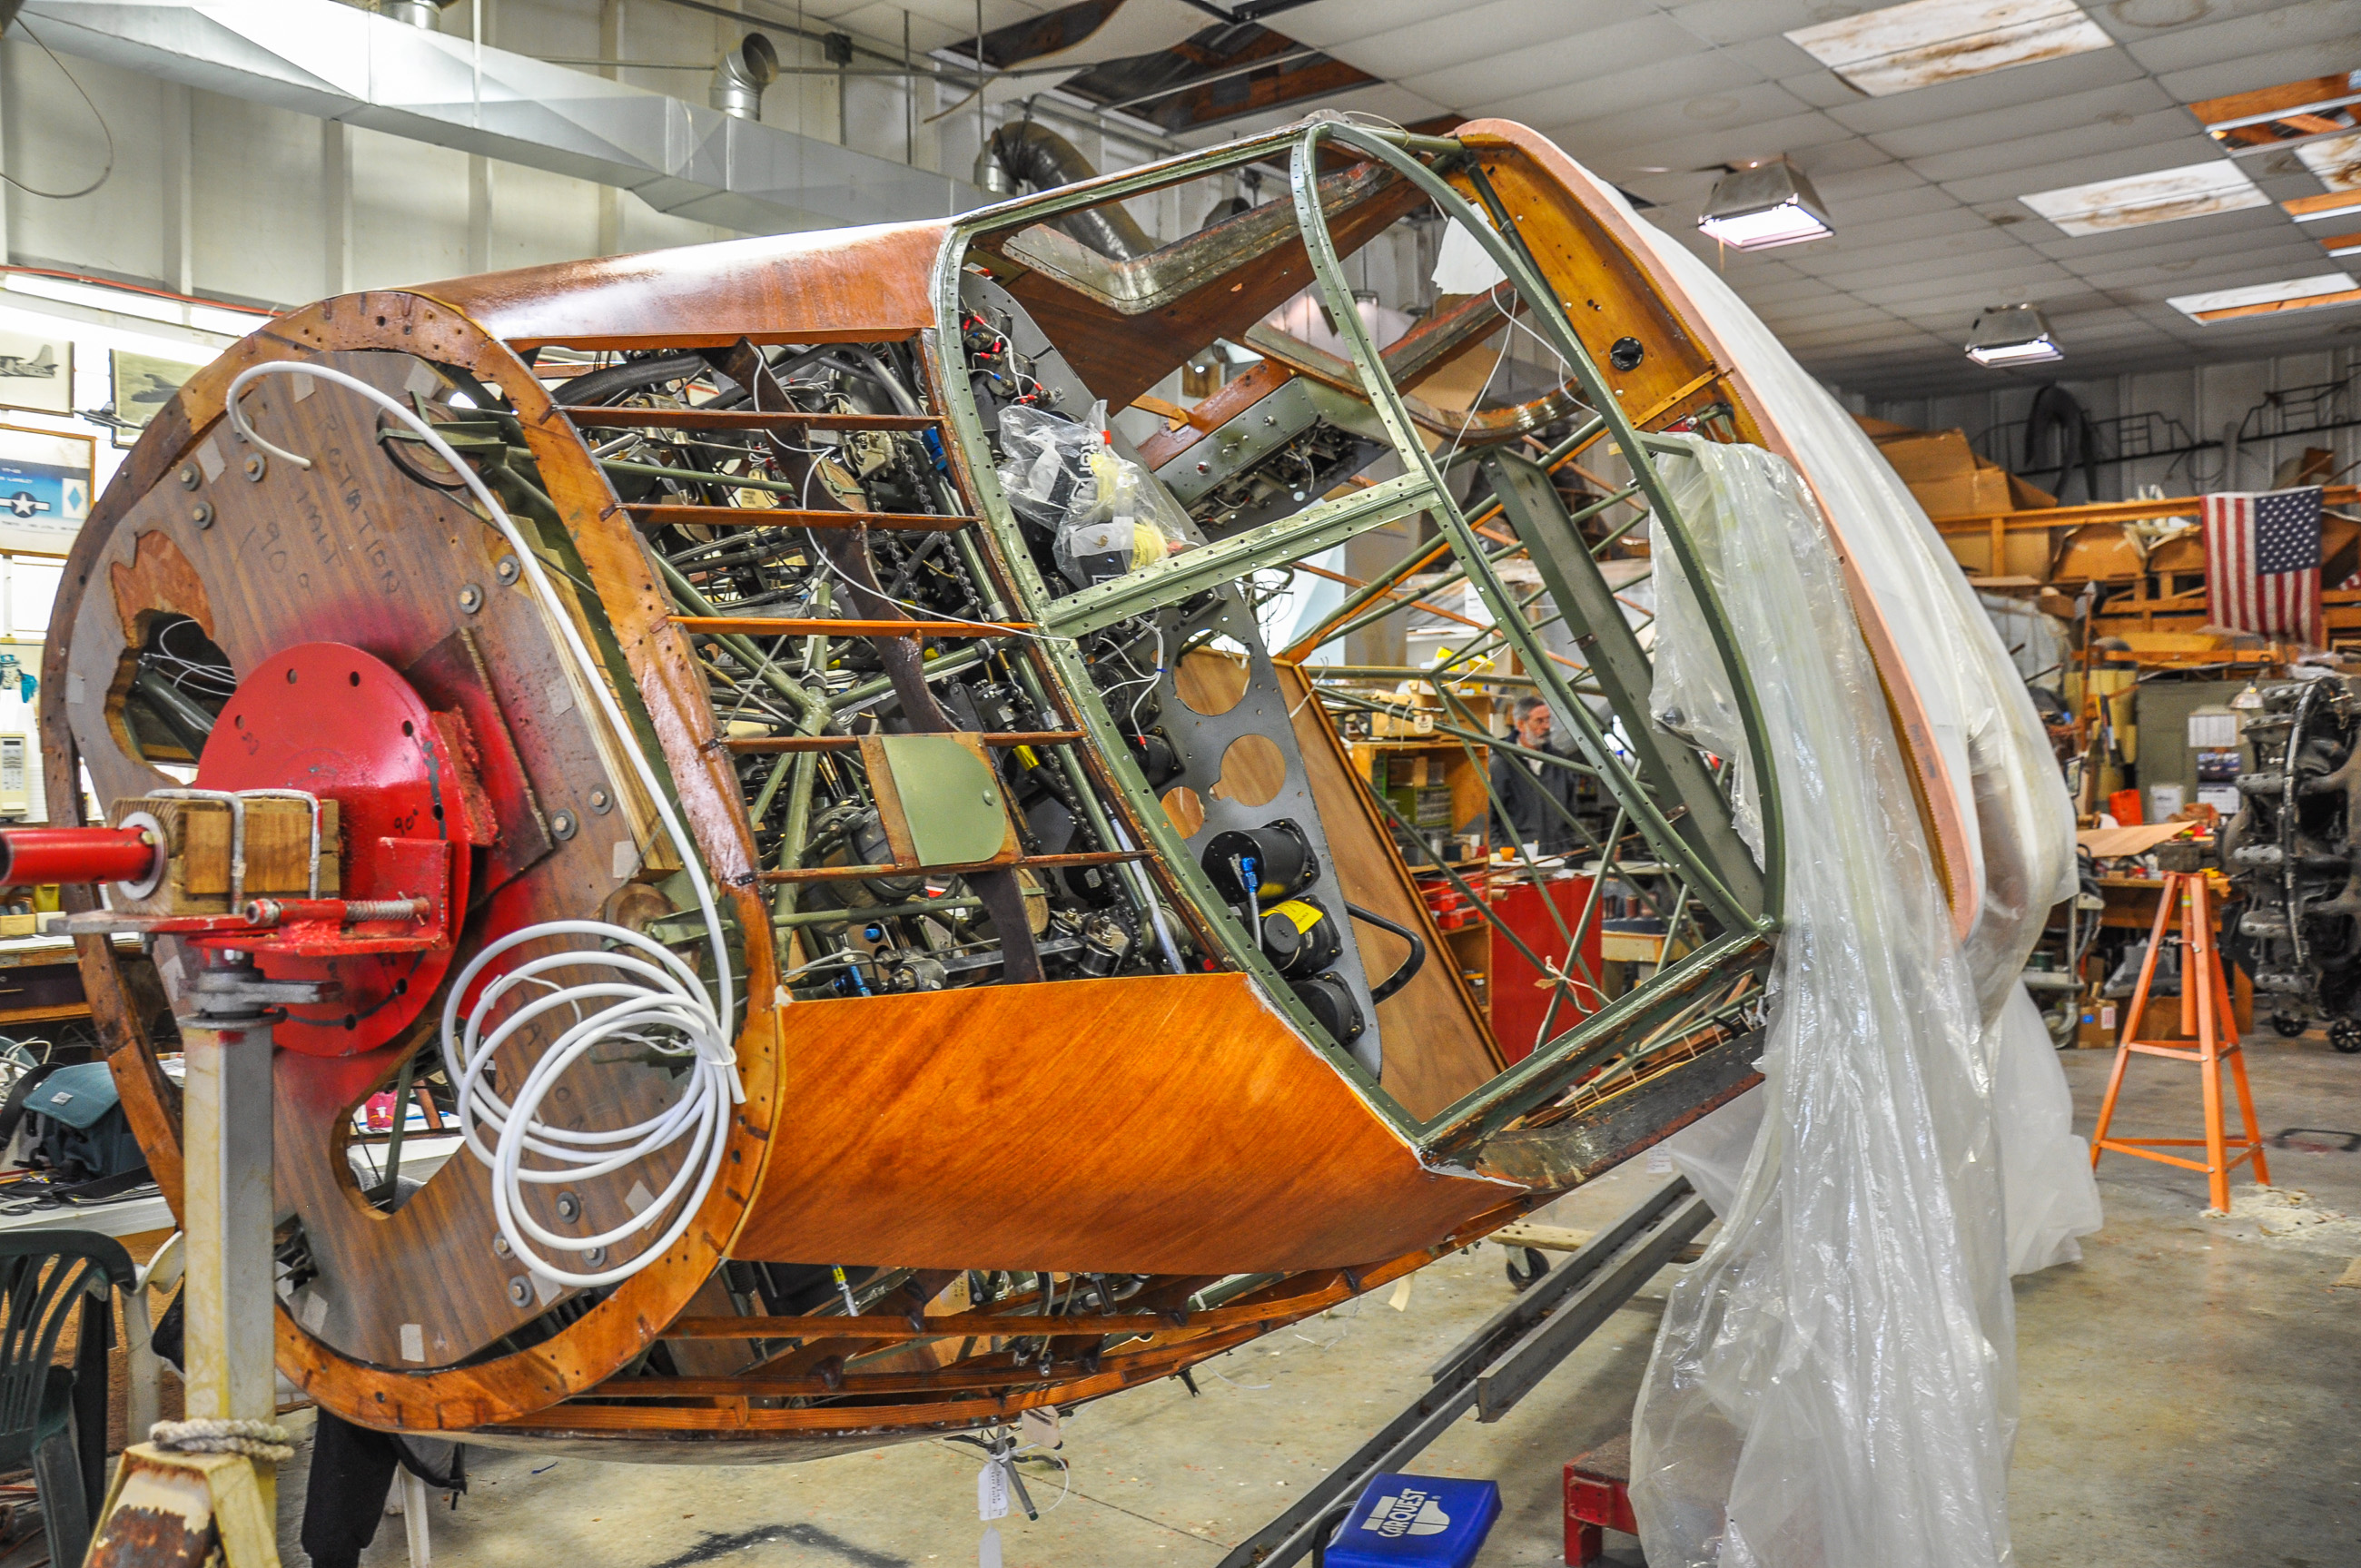 The UC-78 in the rotisserie (taken November 2014). (photo by David Cohen)